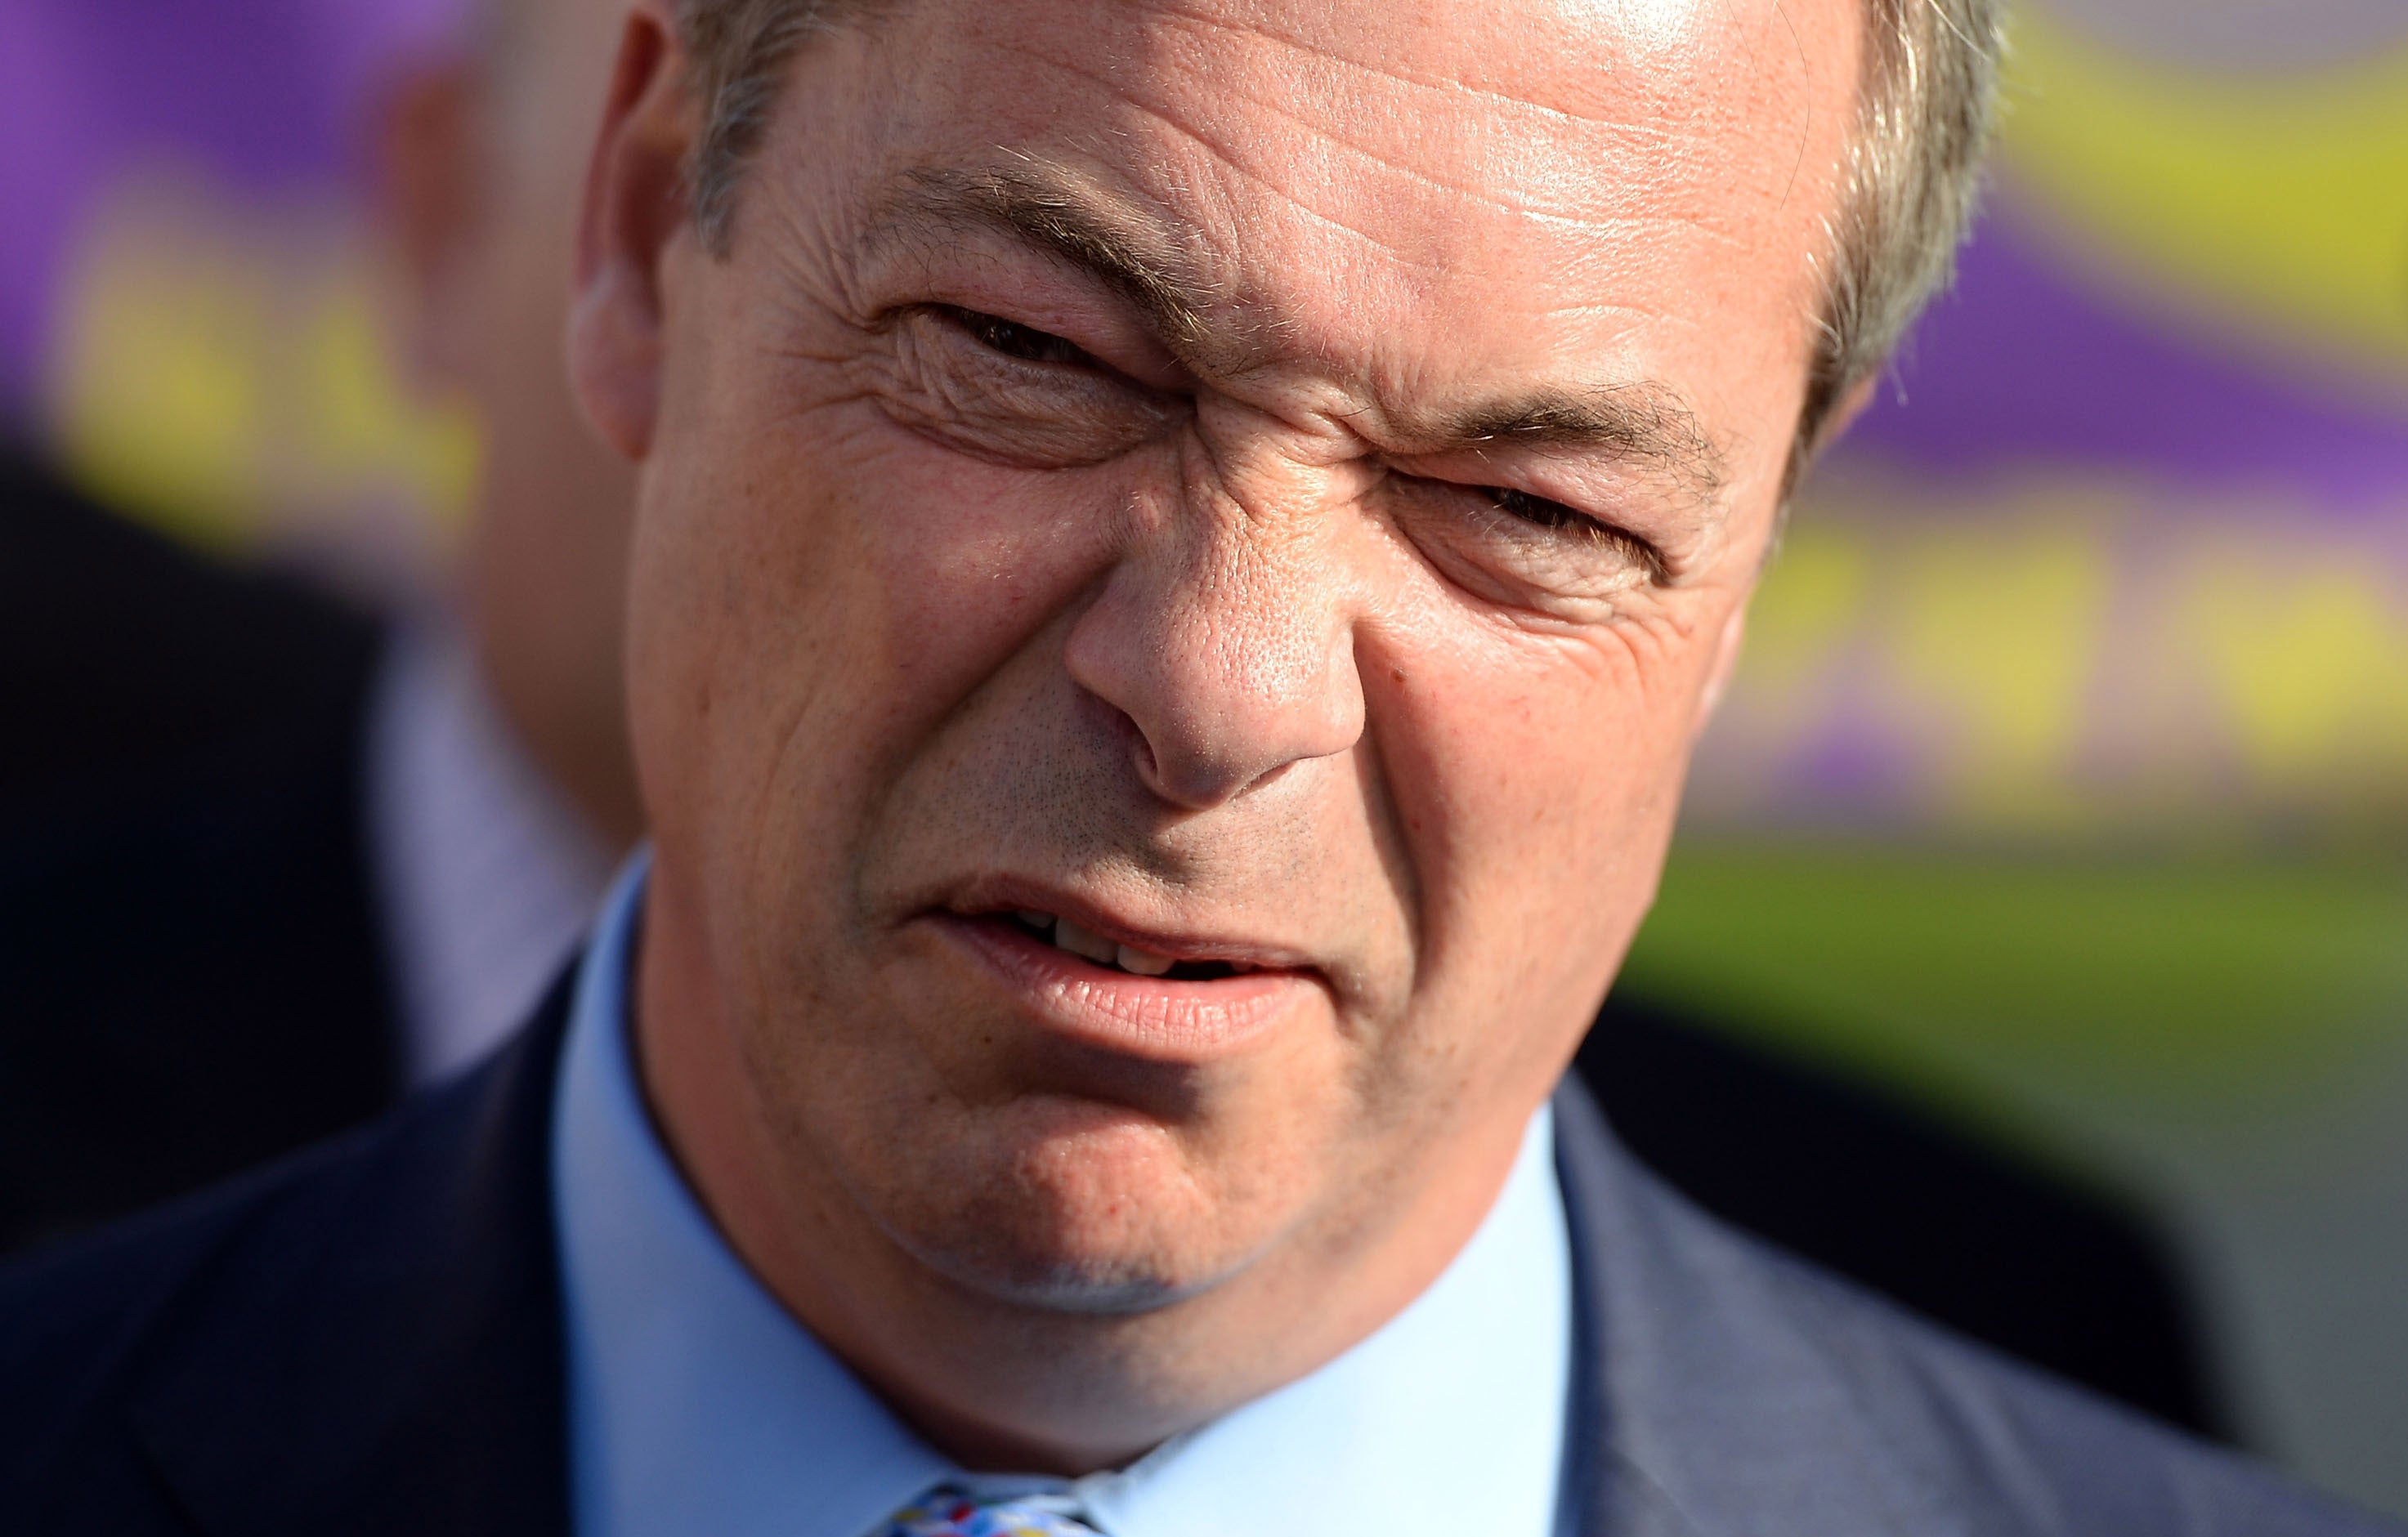 Ukip has been voted the UK's most hated brand